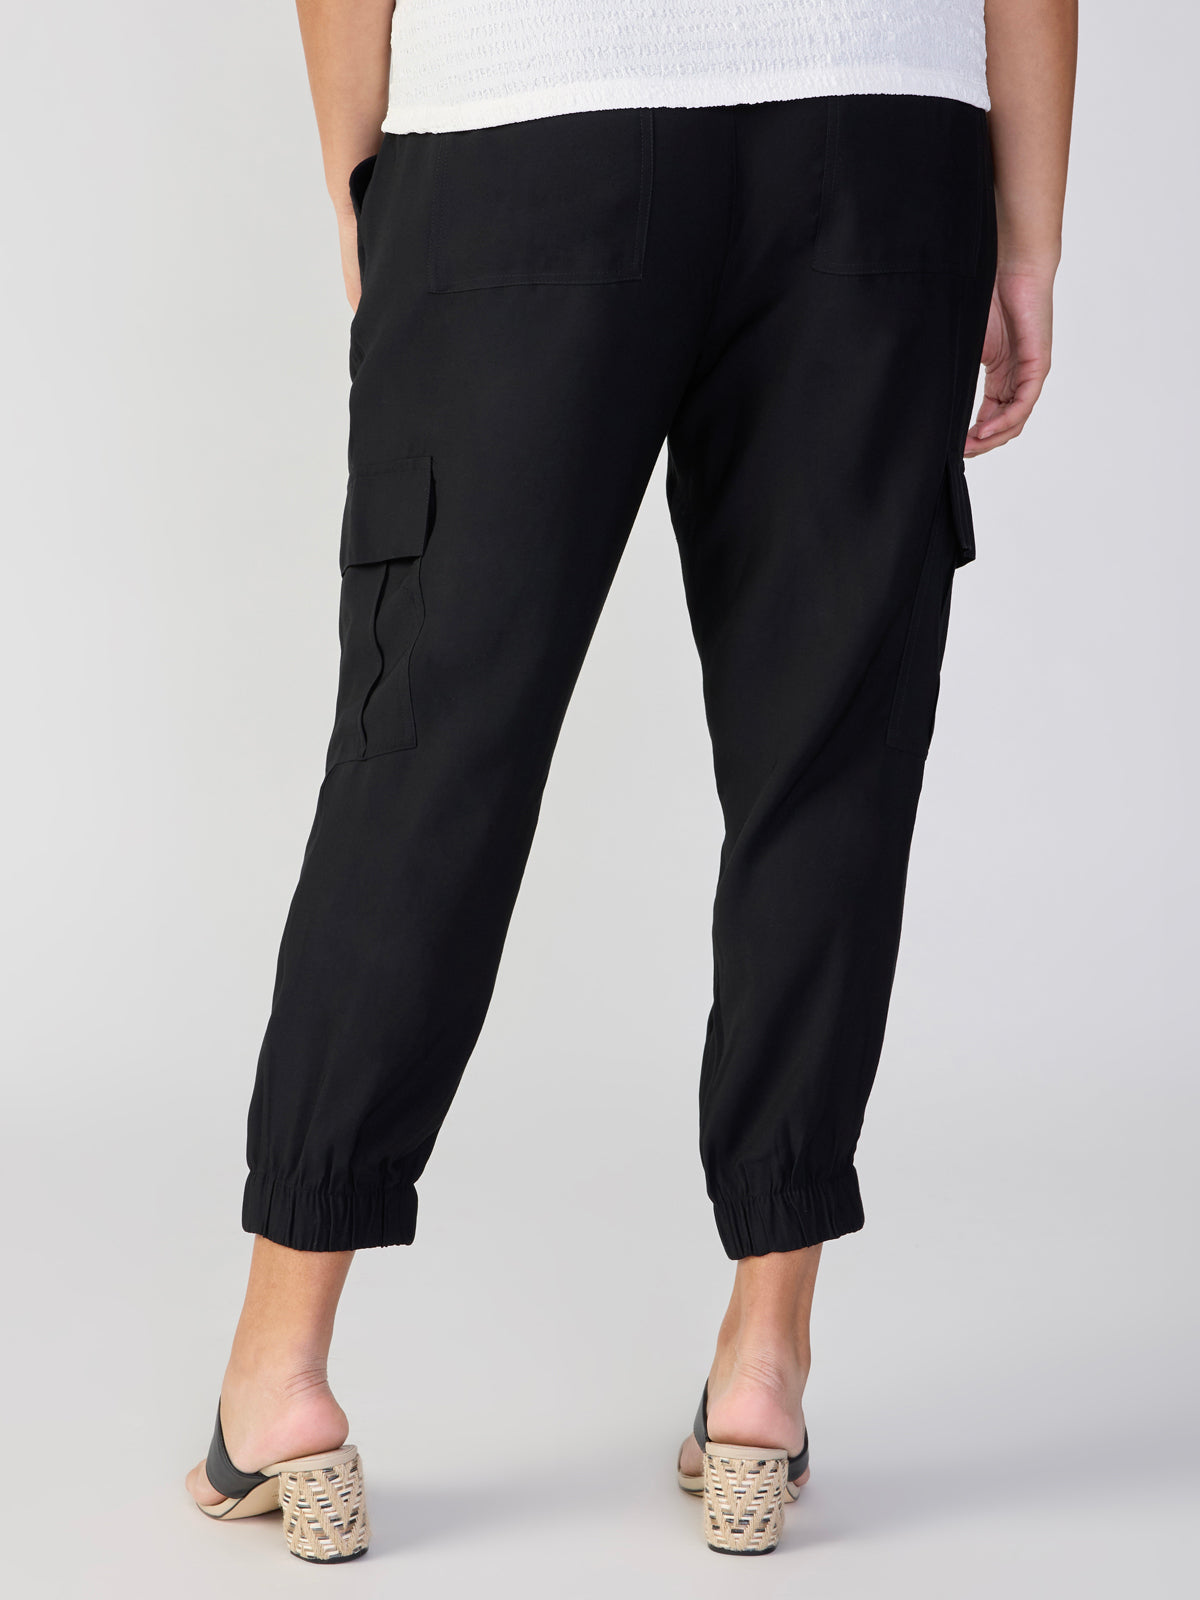 The Harmony Semi High Rise Pant Black Inclusive Collection